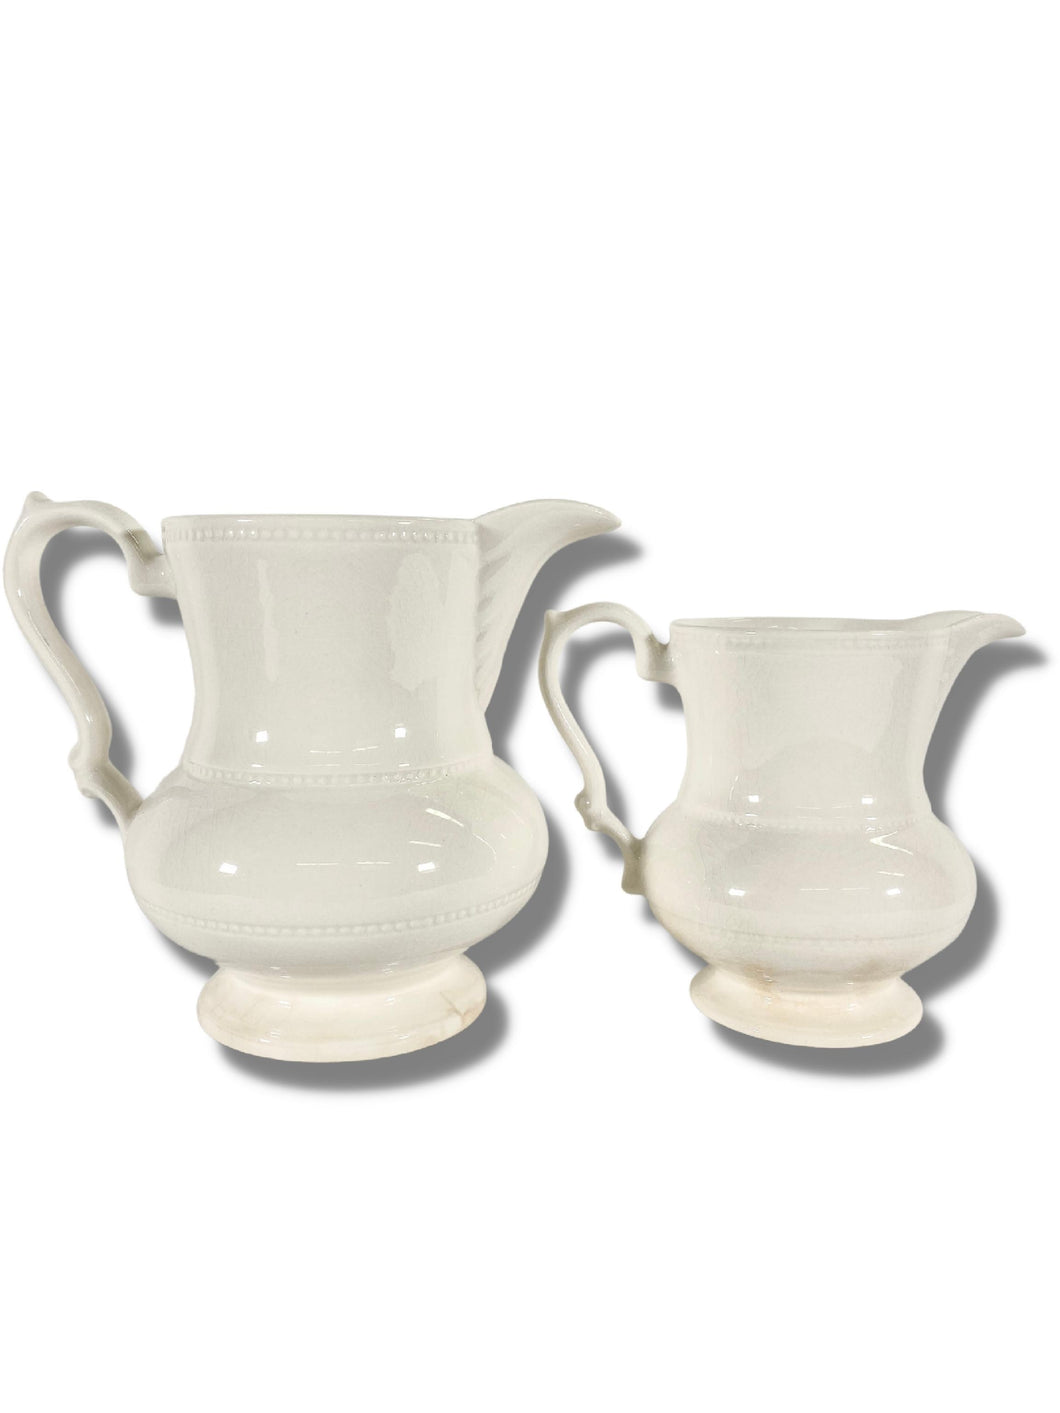 Small Assorted Ironstone Pitchers (Pair)